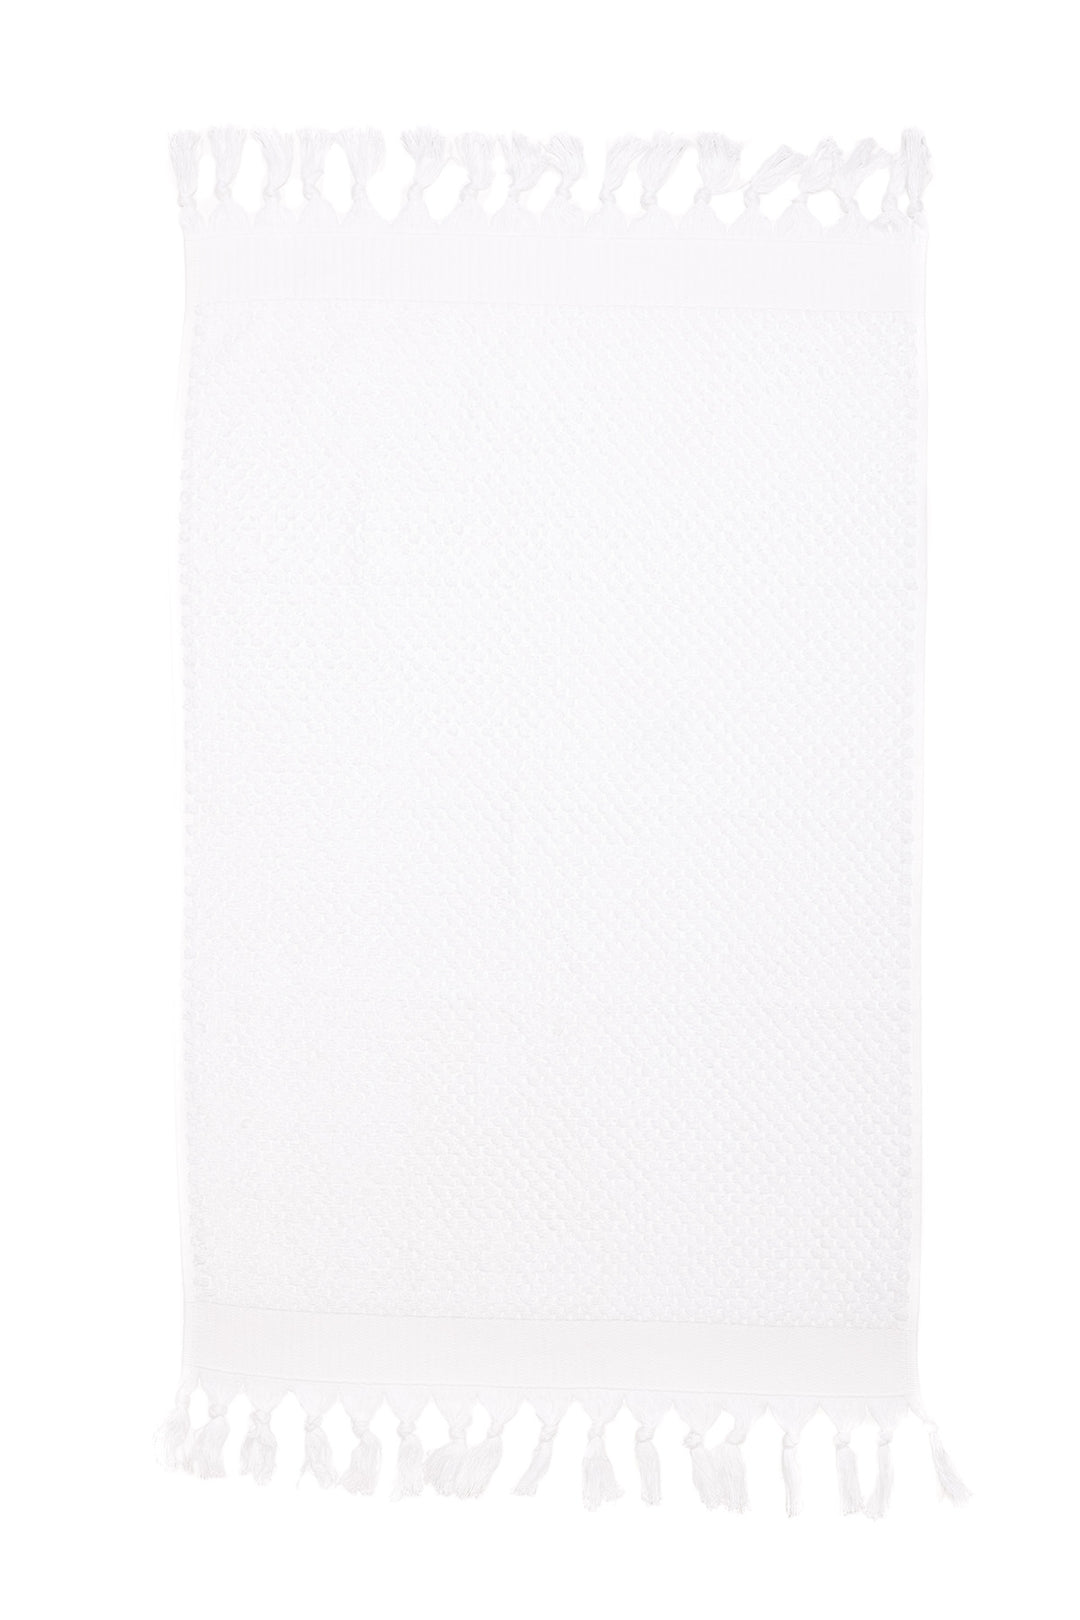 The Crescent Hand Towel Series